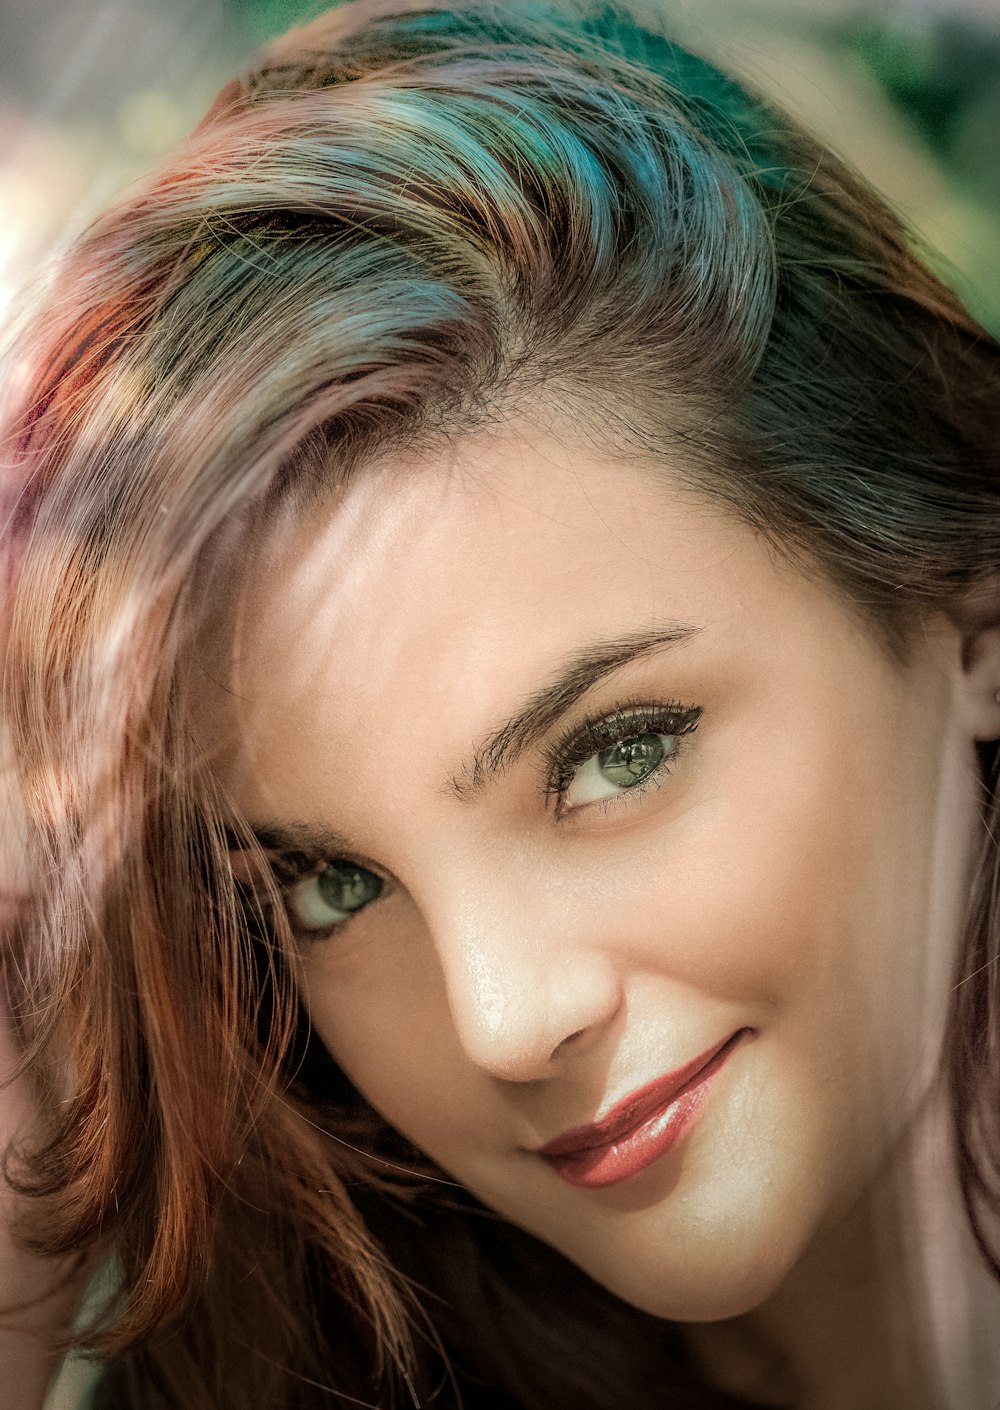 woman with blue eyes and brown hair